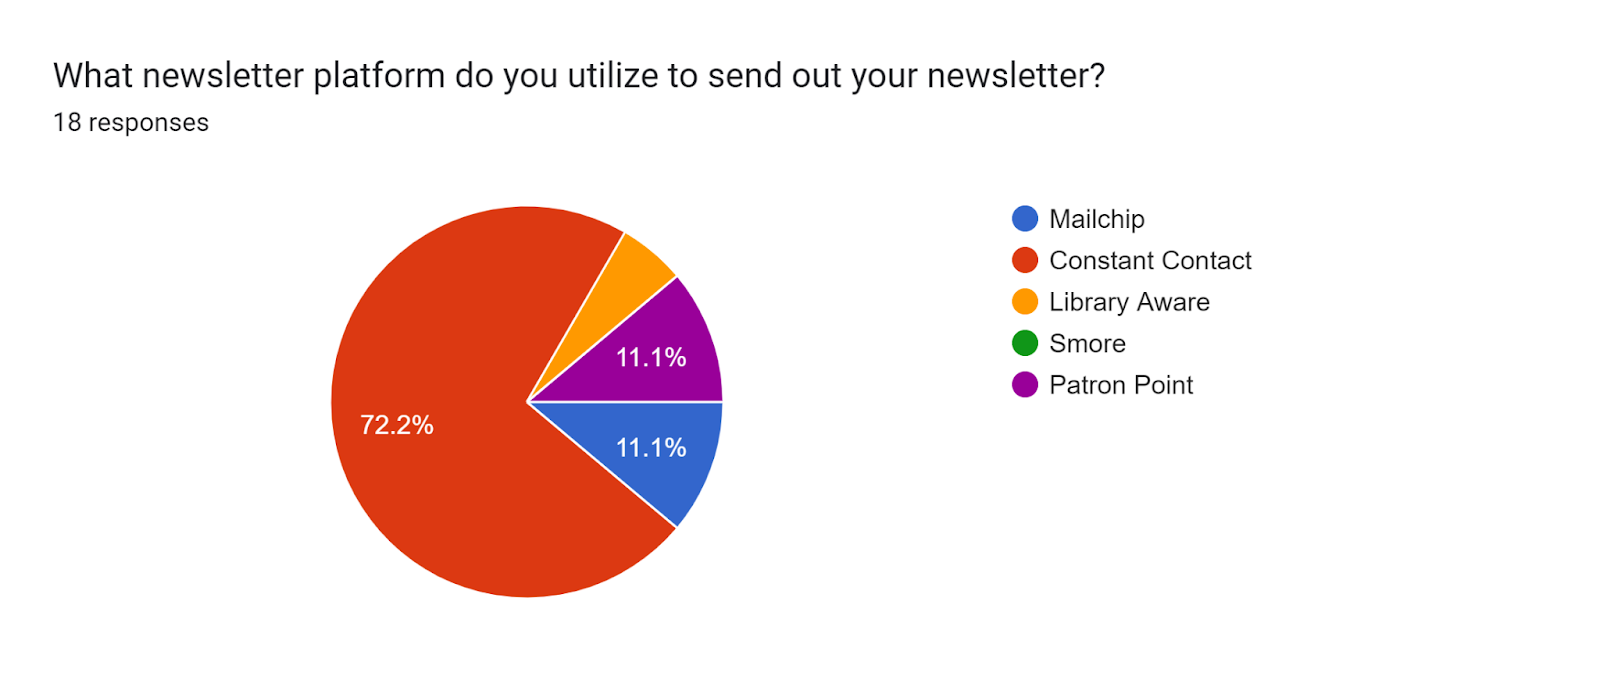 Forms response chart. Question title: What newsletter platform do you utilize to send out your newsletter?<br />
. Number of responses: 18 responses.